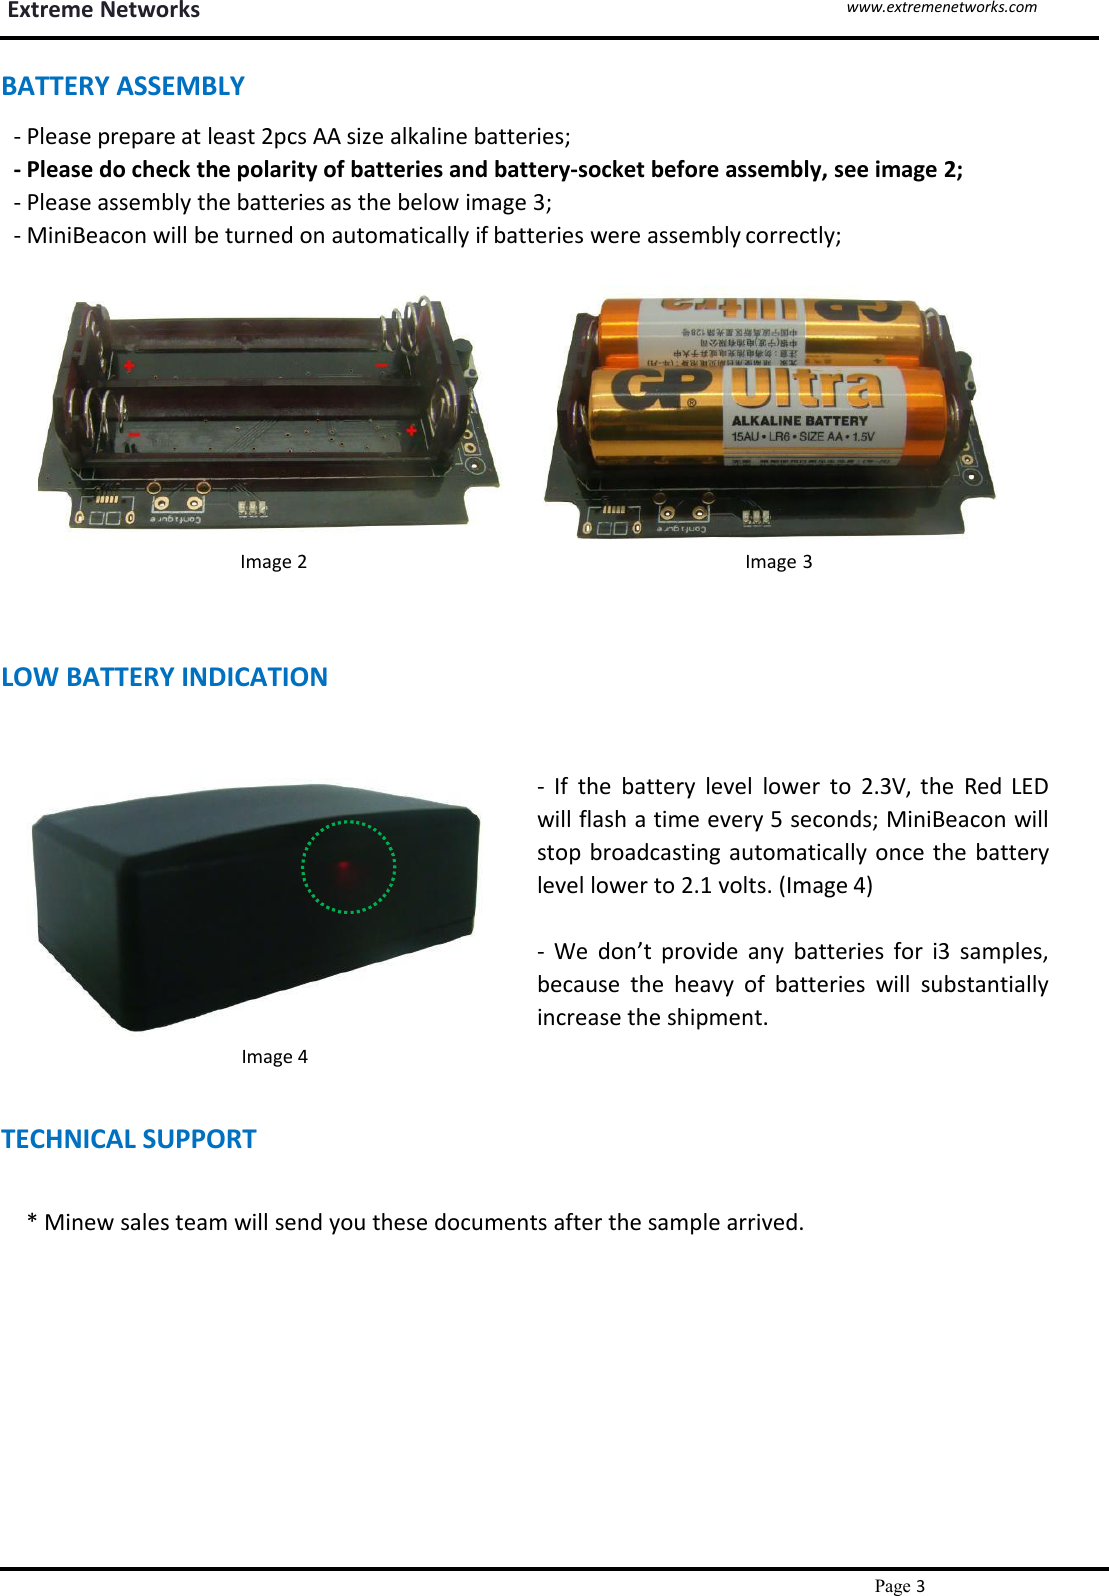 Extreme Networkswww.extremenetworks.comPage 3`BATTERY ASSEMBLY- Please prepare at least 2pcs AA size alkaline batteries;- Please do check the polarity of batteries and battery-socket before assembly, see image 2;- Please assembly the batteries as the below image 3;- MiniBeacon will be turned on automatically if batteries were assembly correctly;Image 2 Image 3LOW BATTERY INDICATION- If the battery level lower to 2.3V, the Red LEDwill flash a time every 5 seconds; MiniBeacon willstop broadcasting automatically once the batterylevel lower to 2.1 volts. (Image 4)Image 4TECHNICAL SUPPORT- We don’t provide any batteries for i3 samples,because the heavy of batteries will substantiallyincrease the shipment.* Minew sales team will send you these documents after the sample arrived.